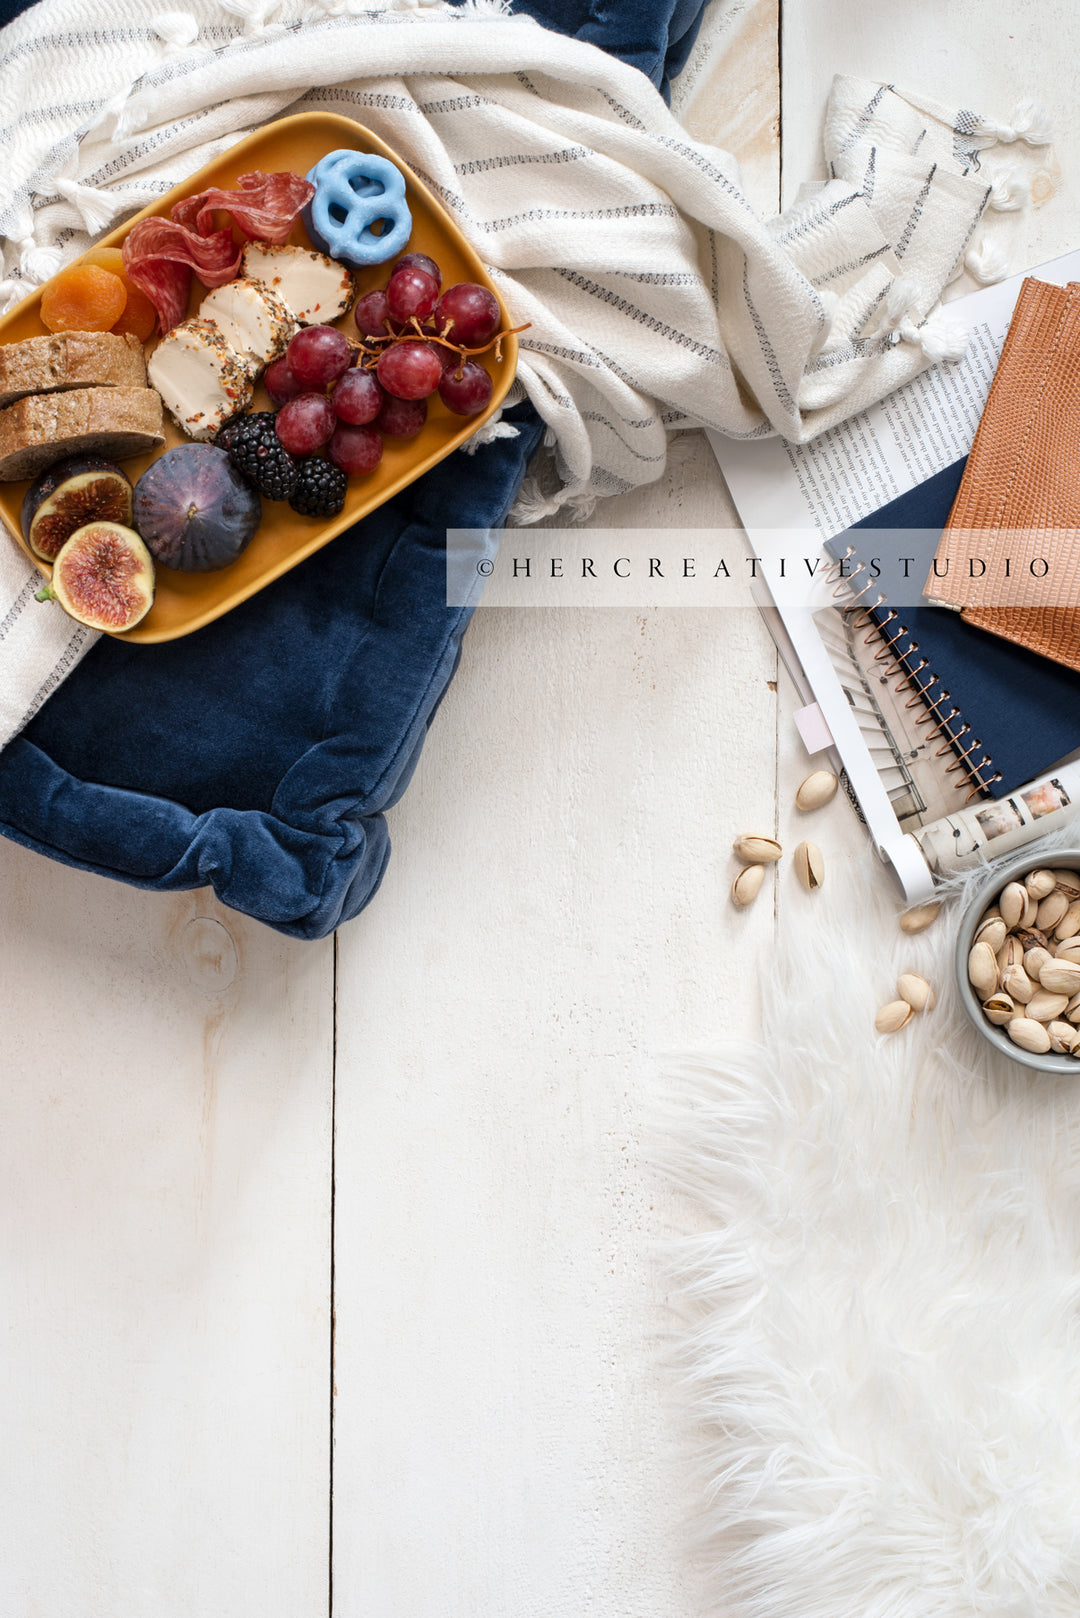 Cheese Plate & Notebooks on Wood Background